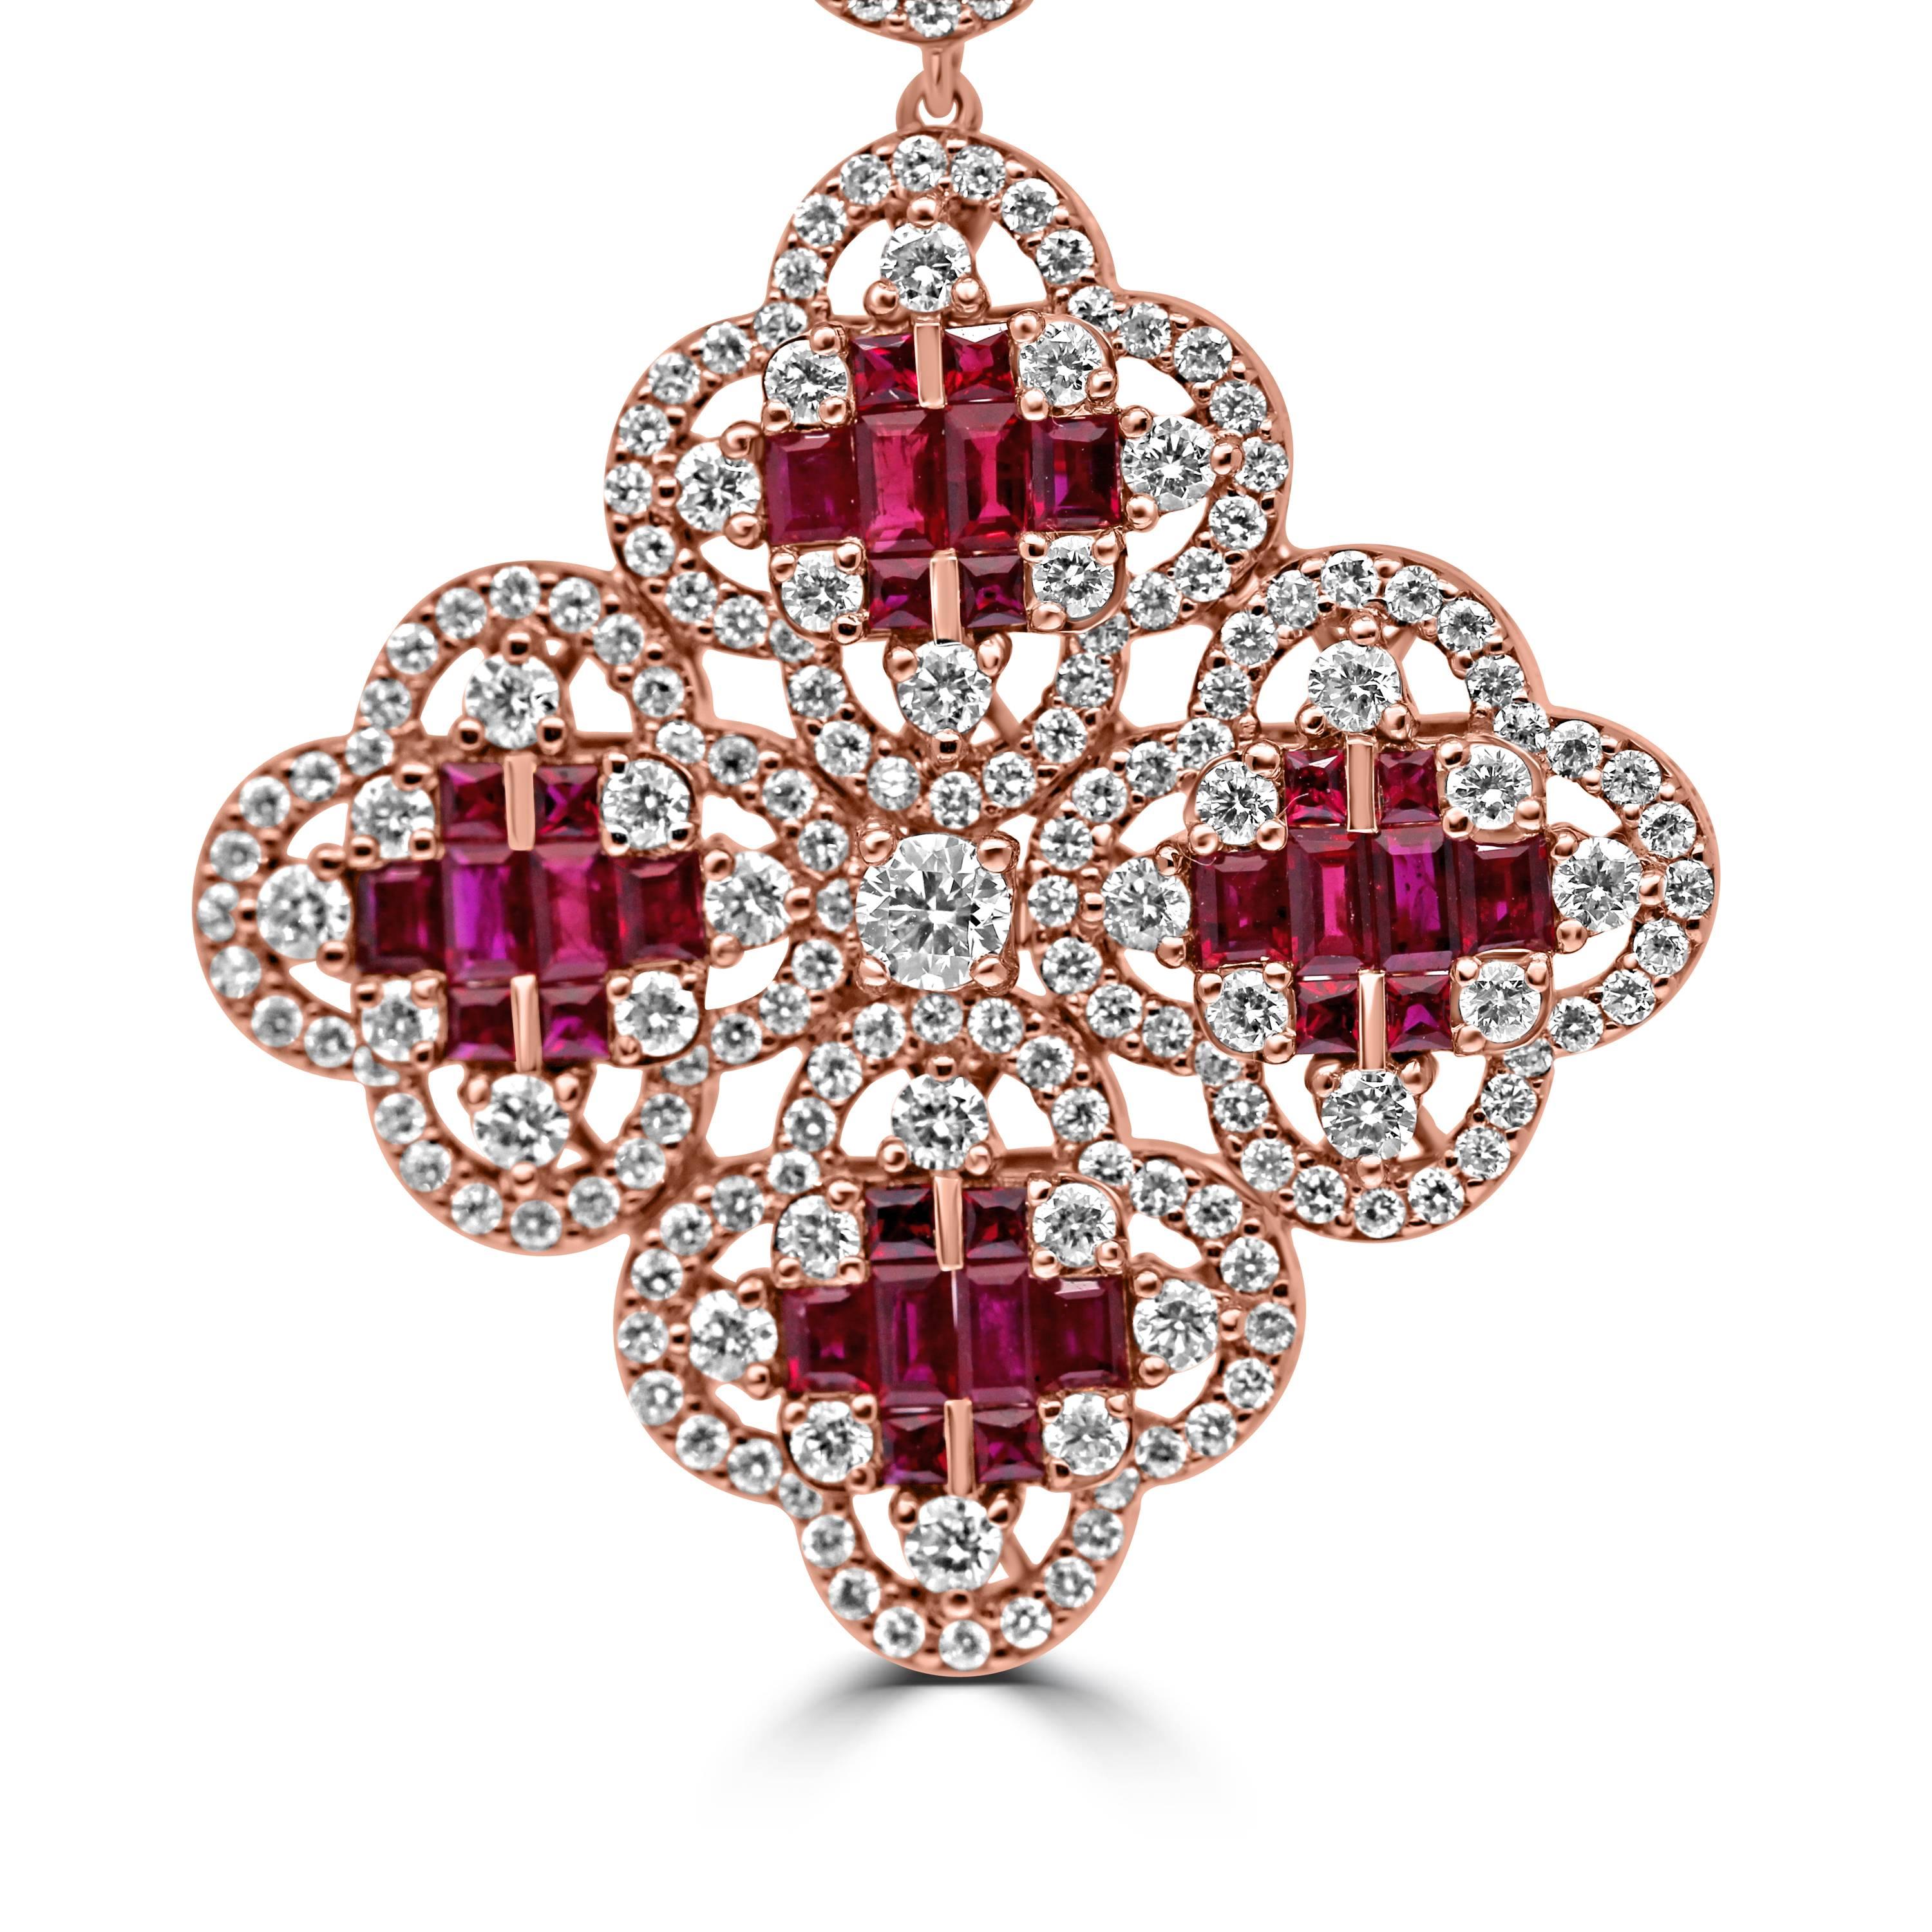 Gorgeous 18kt rose gold Clover pendant.
Mounted with 2.49ct of white brilliant cut diamonds and 2.51ct of elongated baguette cut natural rubies gemstones.
Comes with an 18kt rose gold chain.

Matching earrings are available.
Perfect for day and